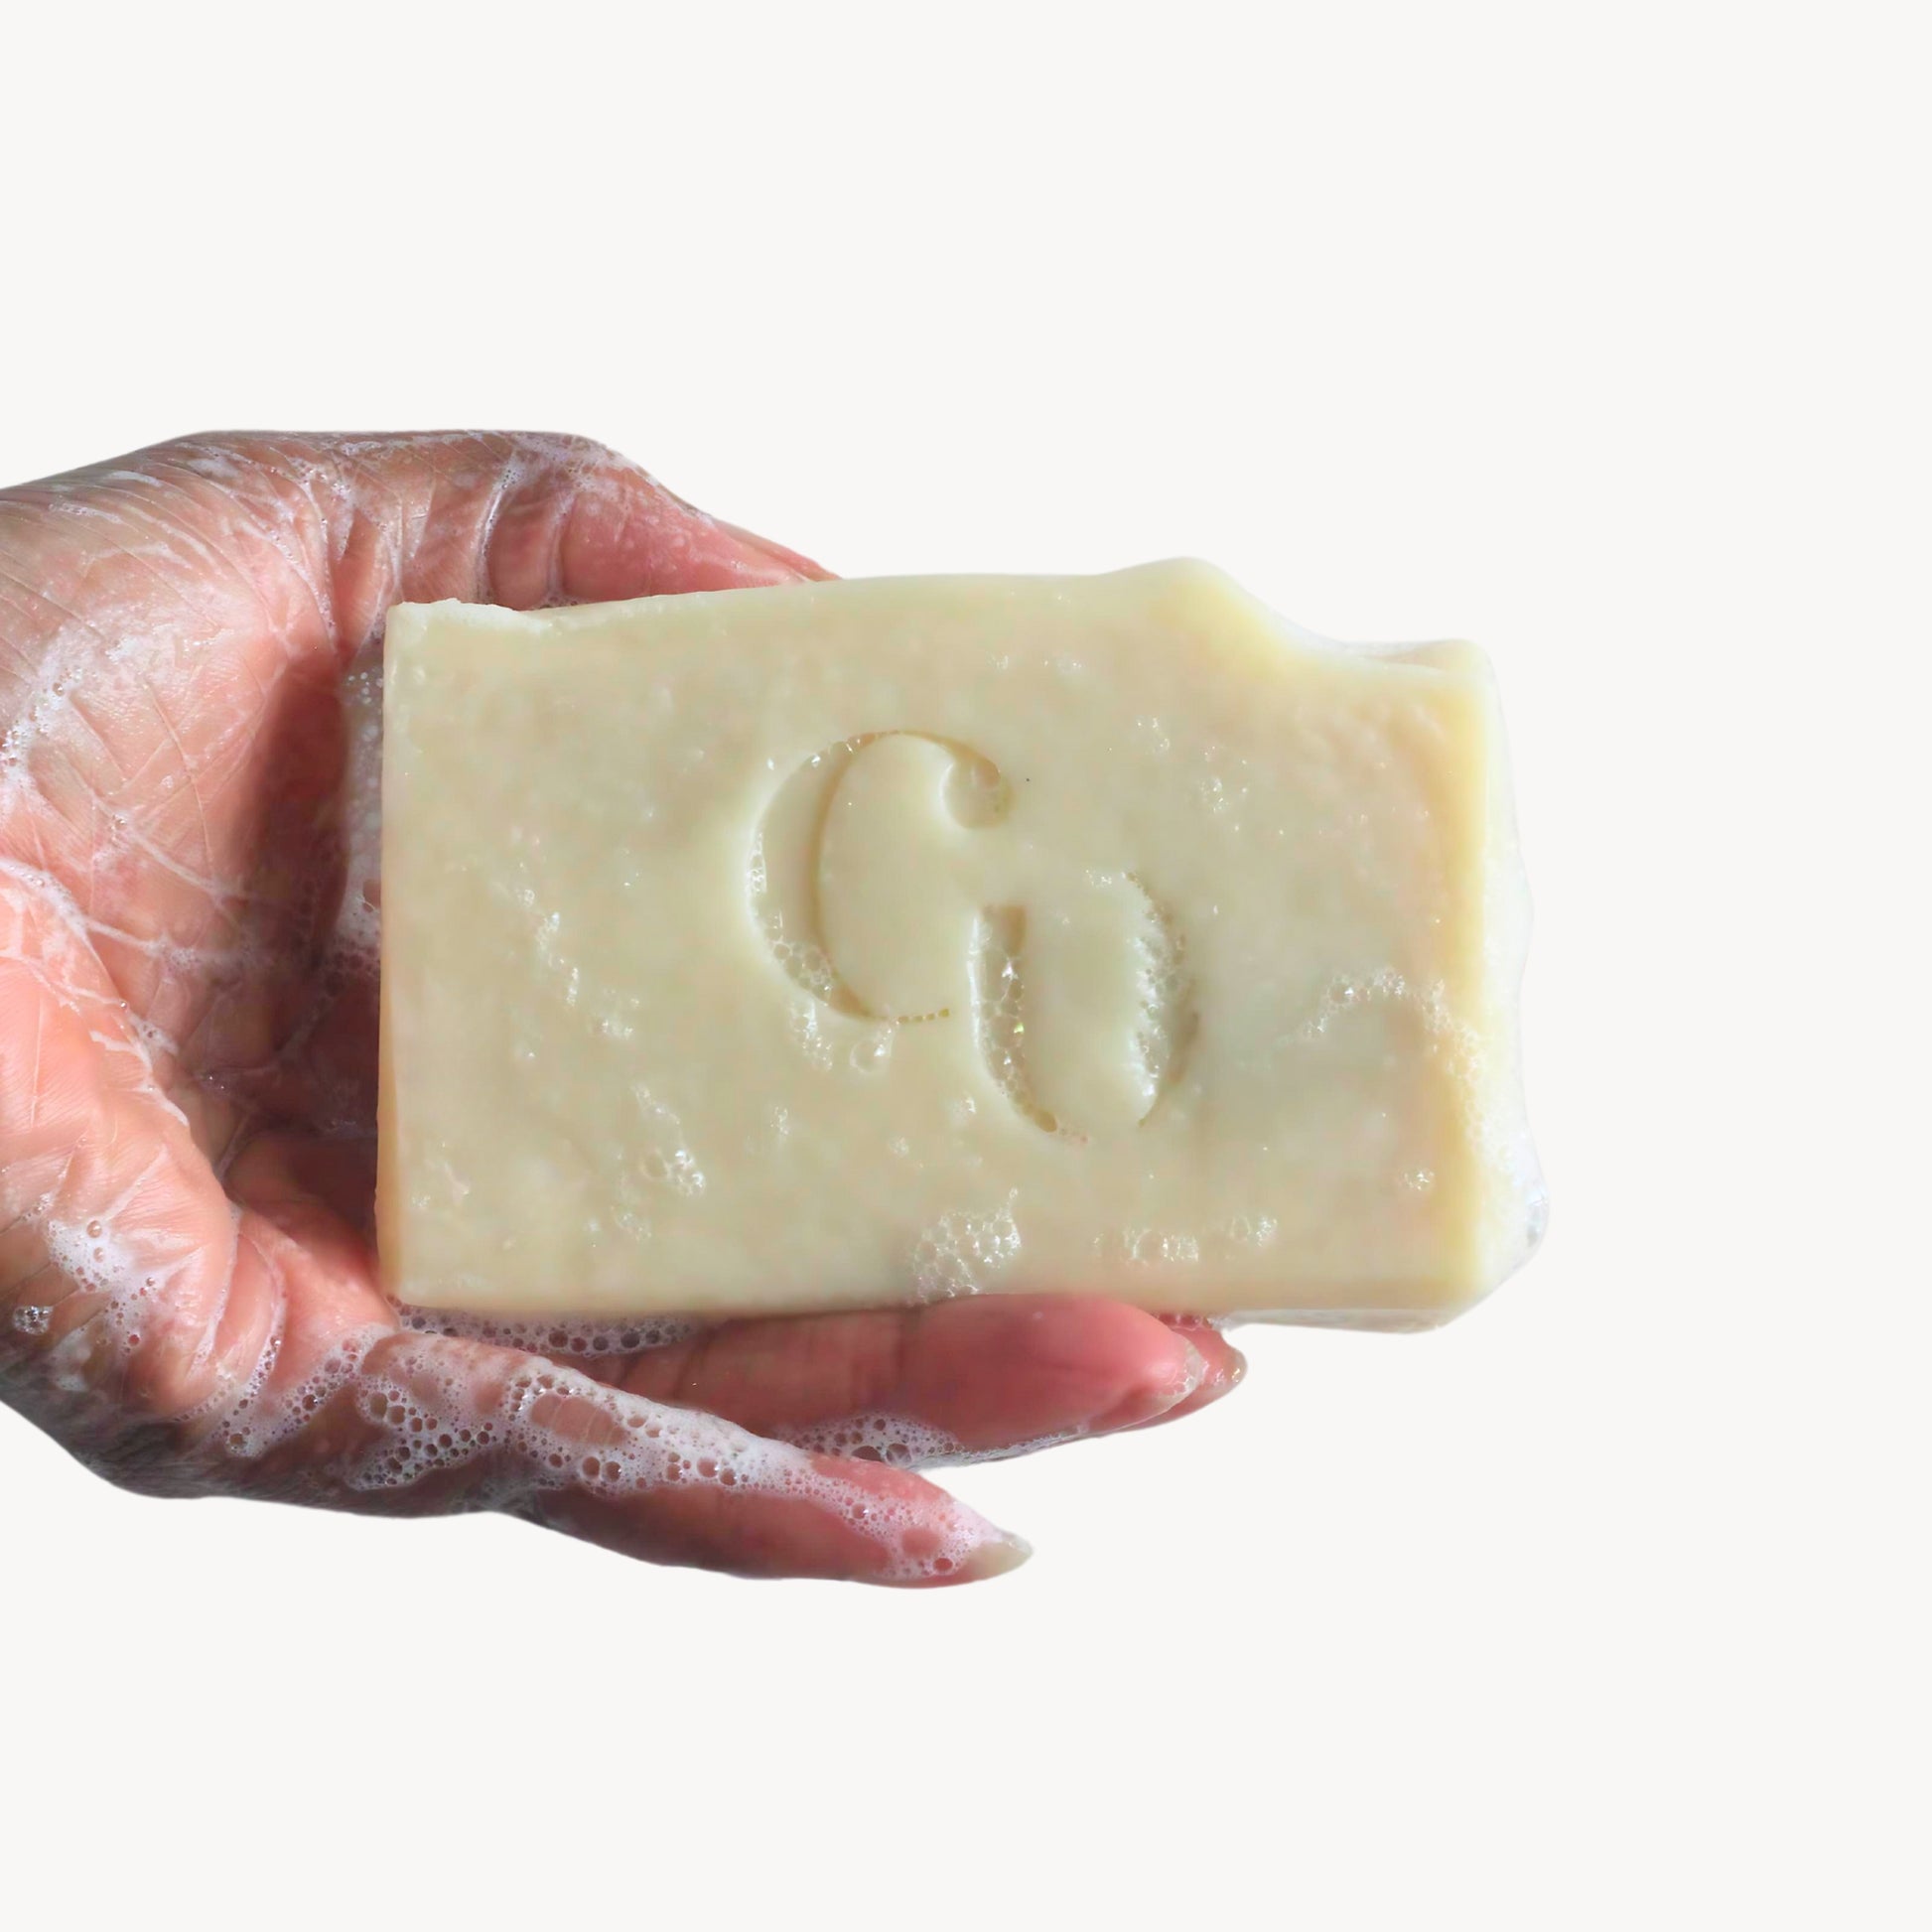 A soapy hand holding a bar of Eucalyptus + Mint soap, generating a cooling, minty lather with hints of eucalyptus